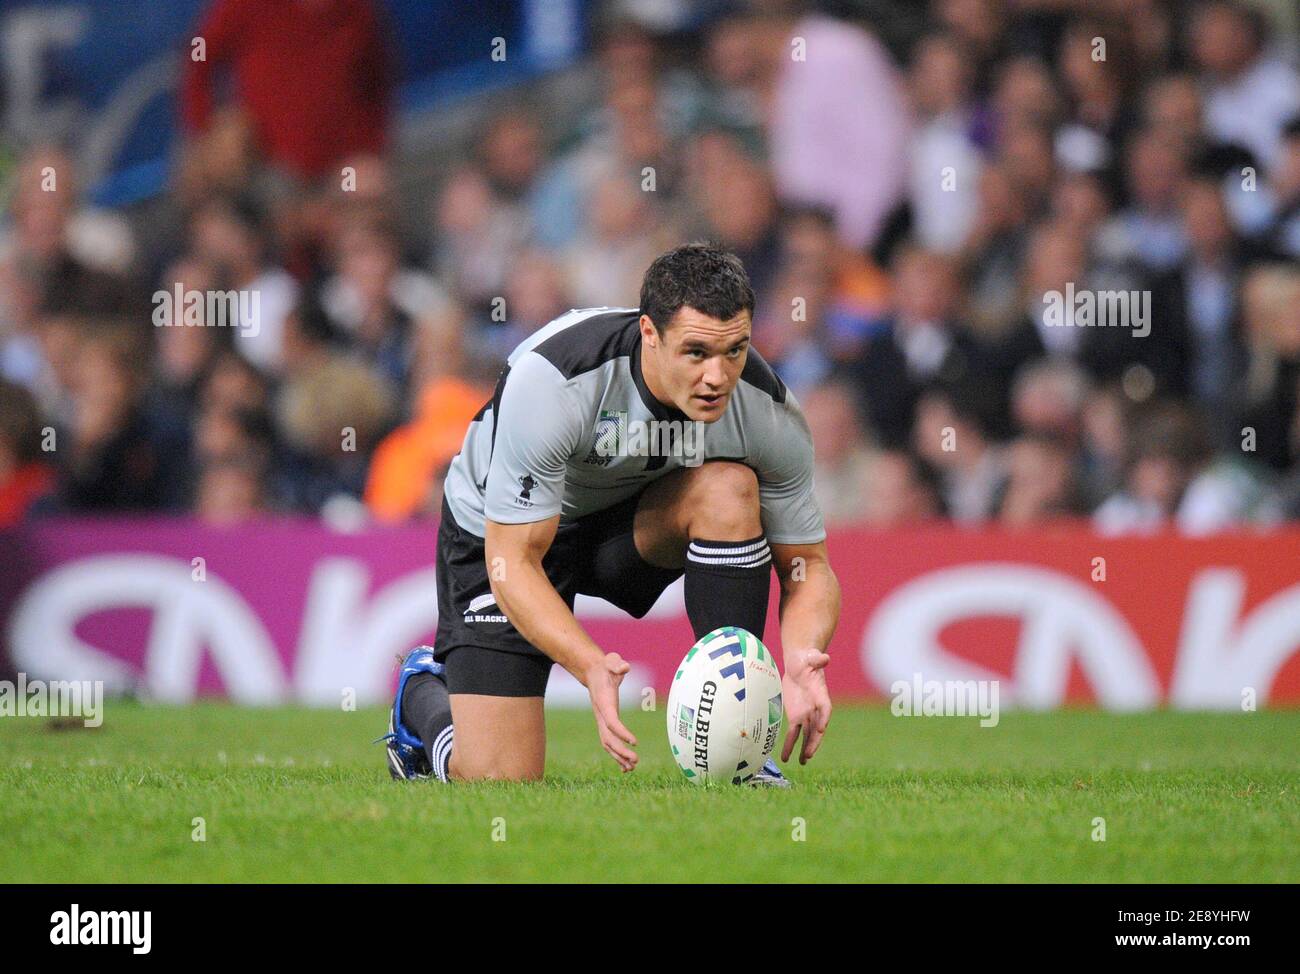 New Zealand's fly-half Dan Carter during the IRB Rugby World Cup 2007, quarter final match France vs New Zealand at the Millennium Stadium in Cardiff, UK on October 6, 2007. Photo by Gouhier-Morton/Cameleon/ABACAPRESS.COM Stock Photo